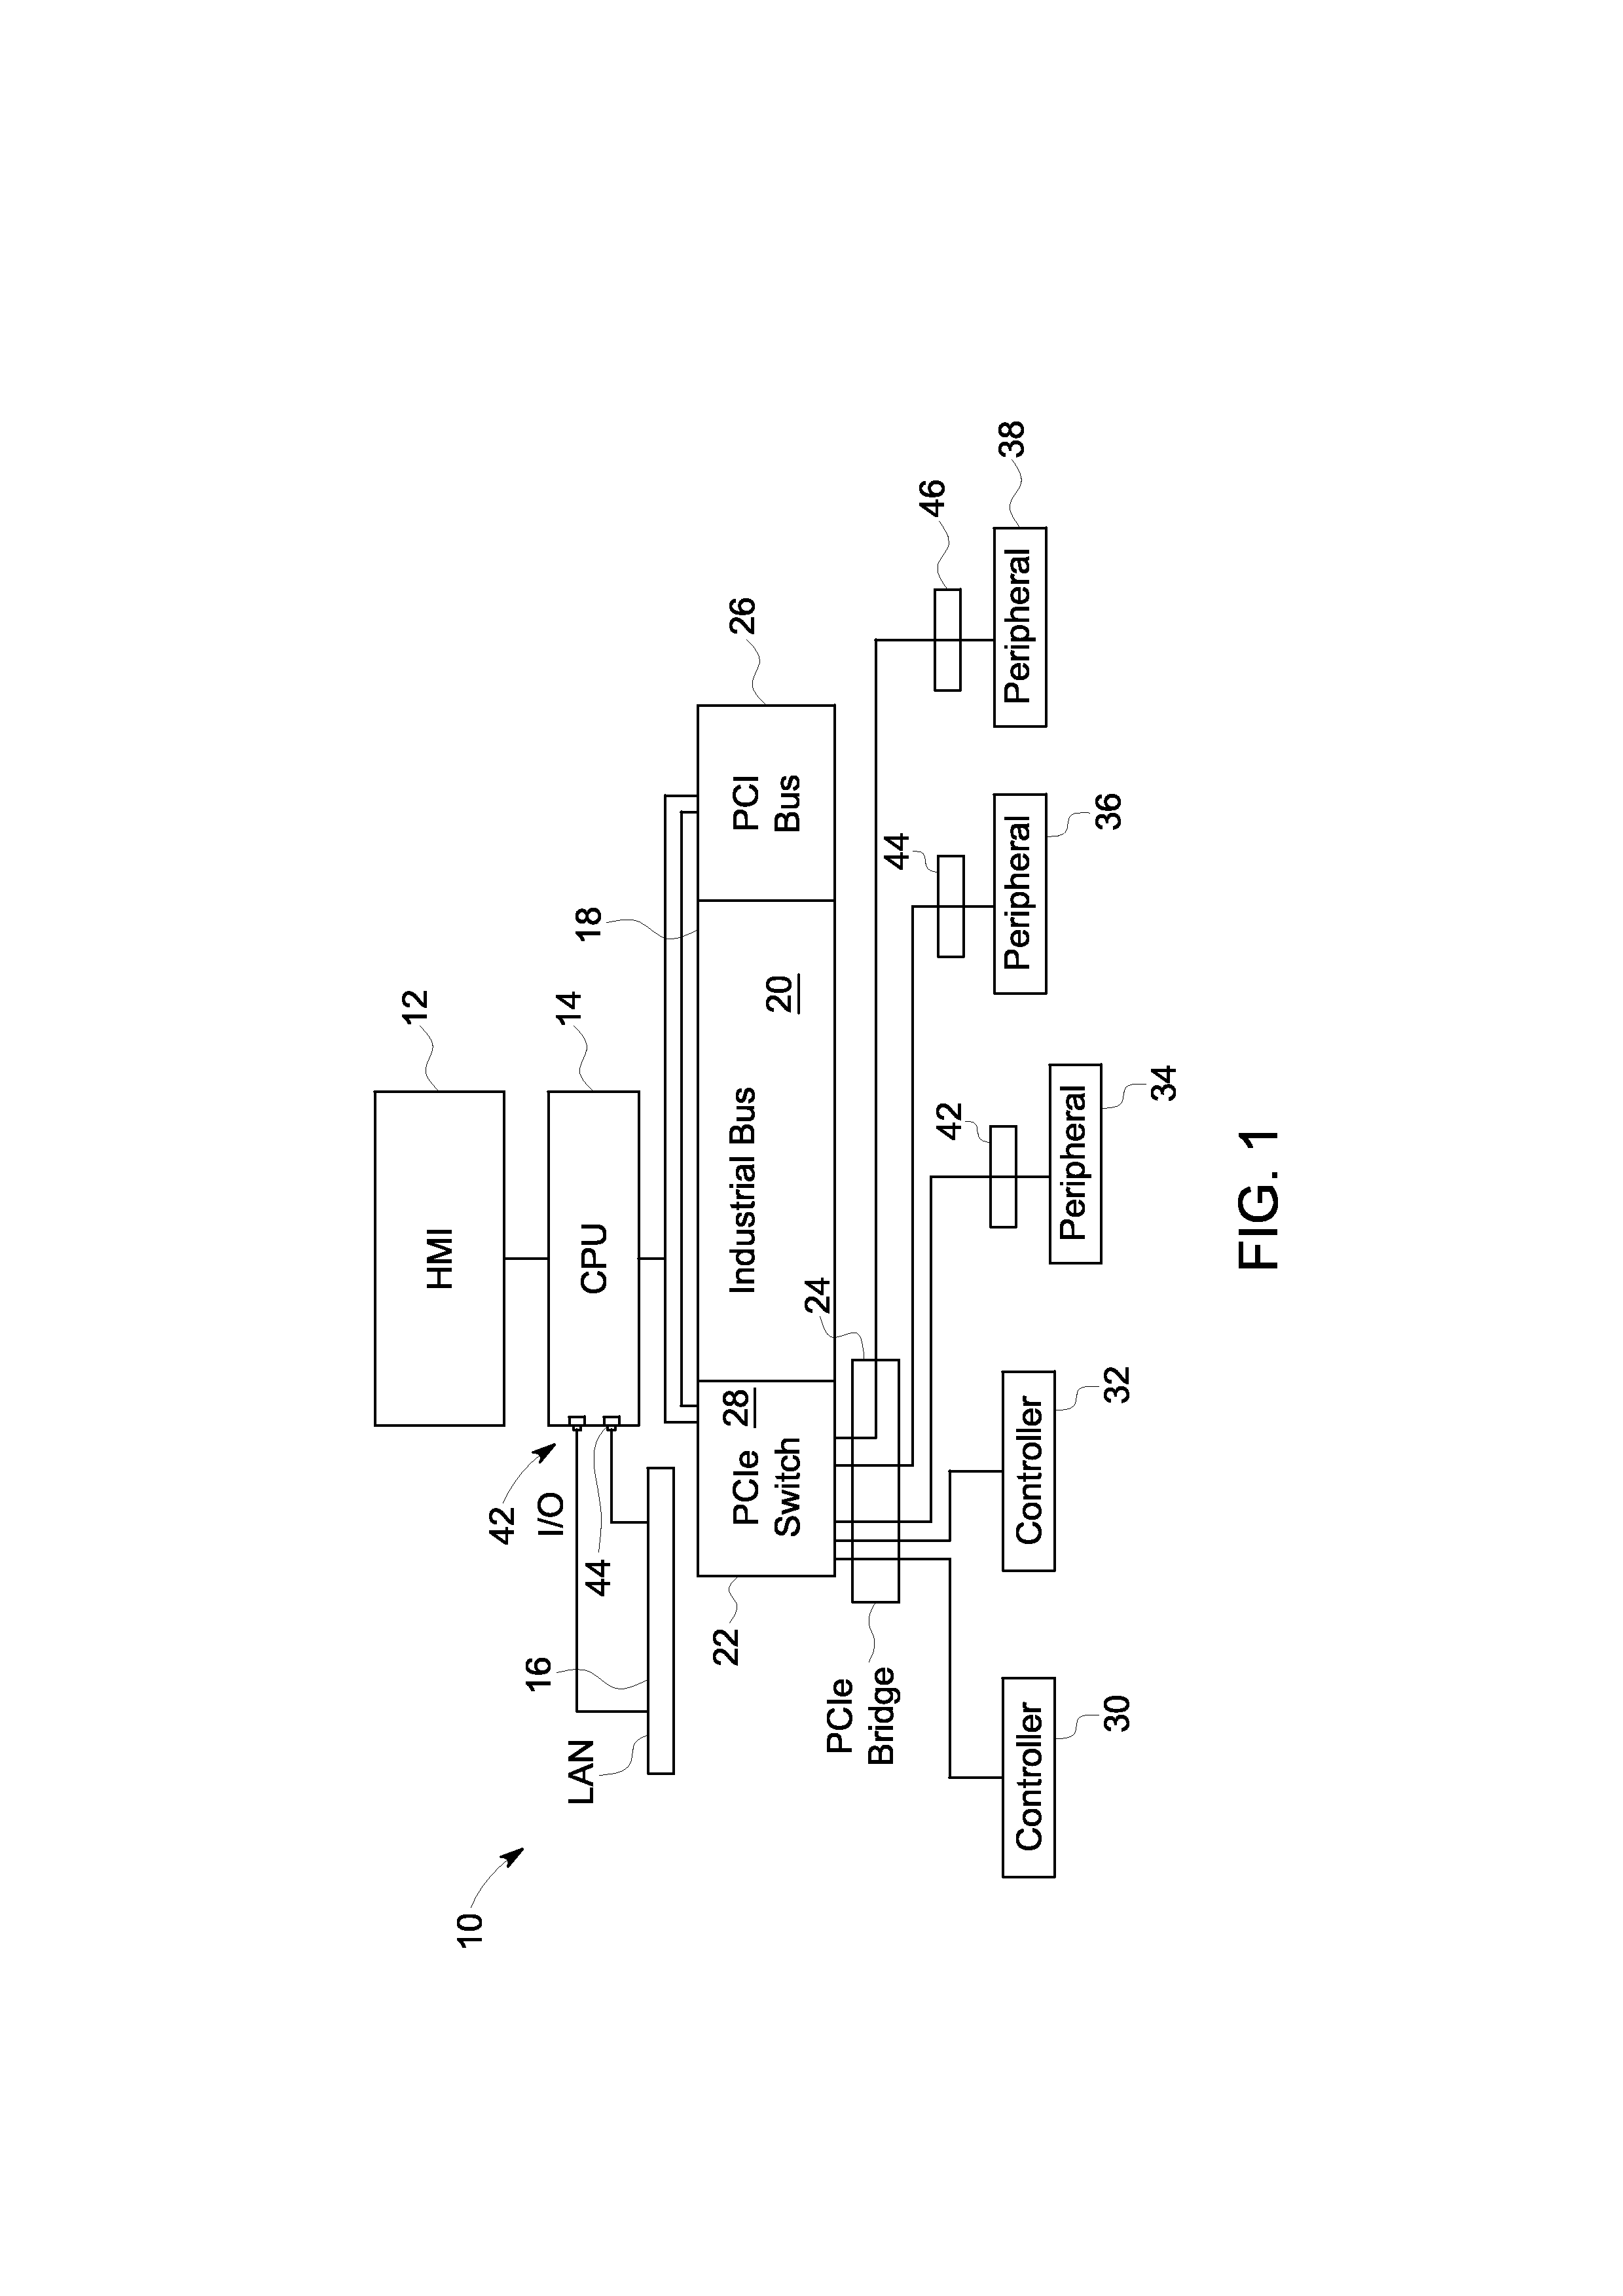 System and method for transmitting and receiving data using an industrial expansion bus